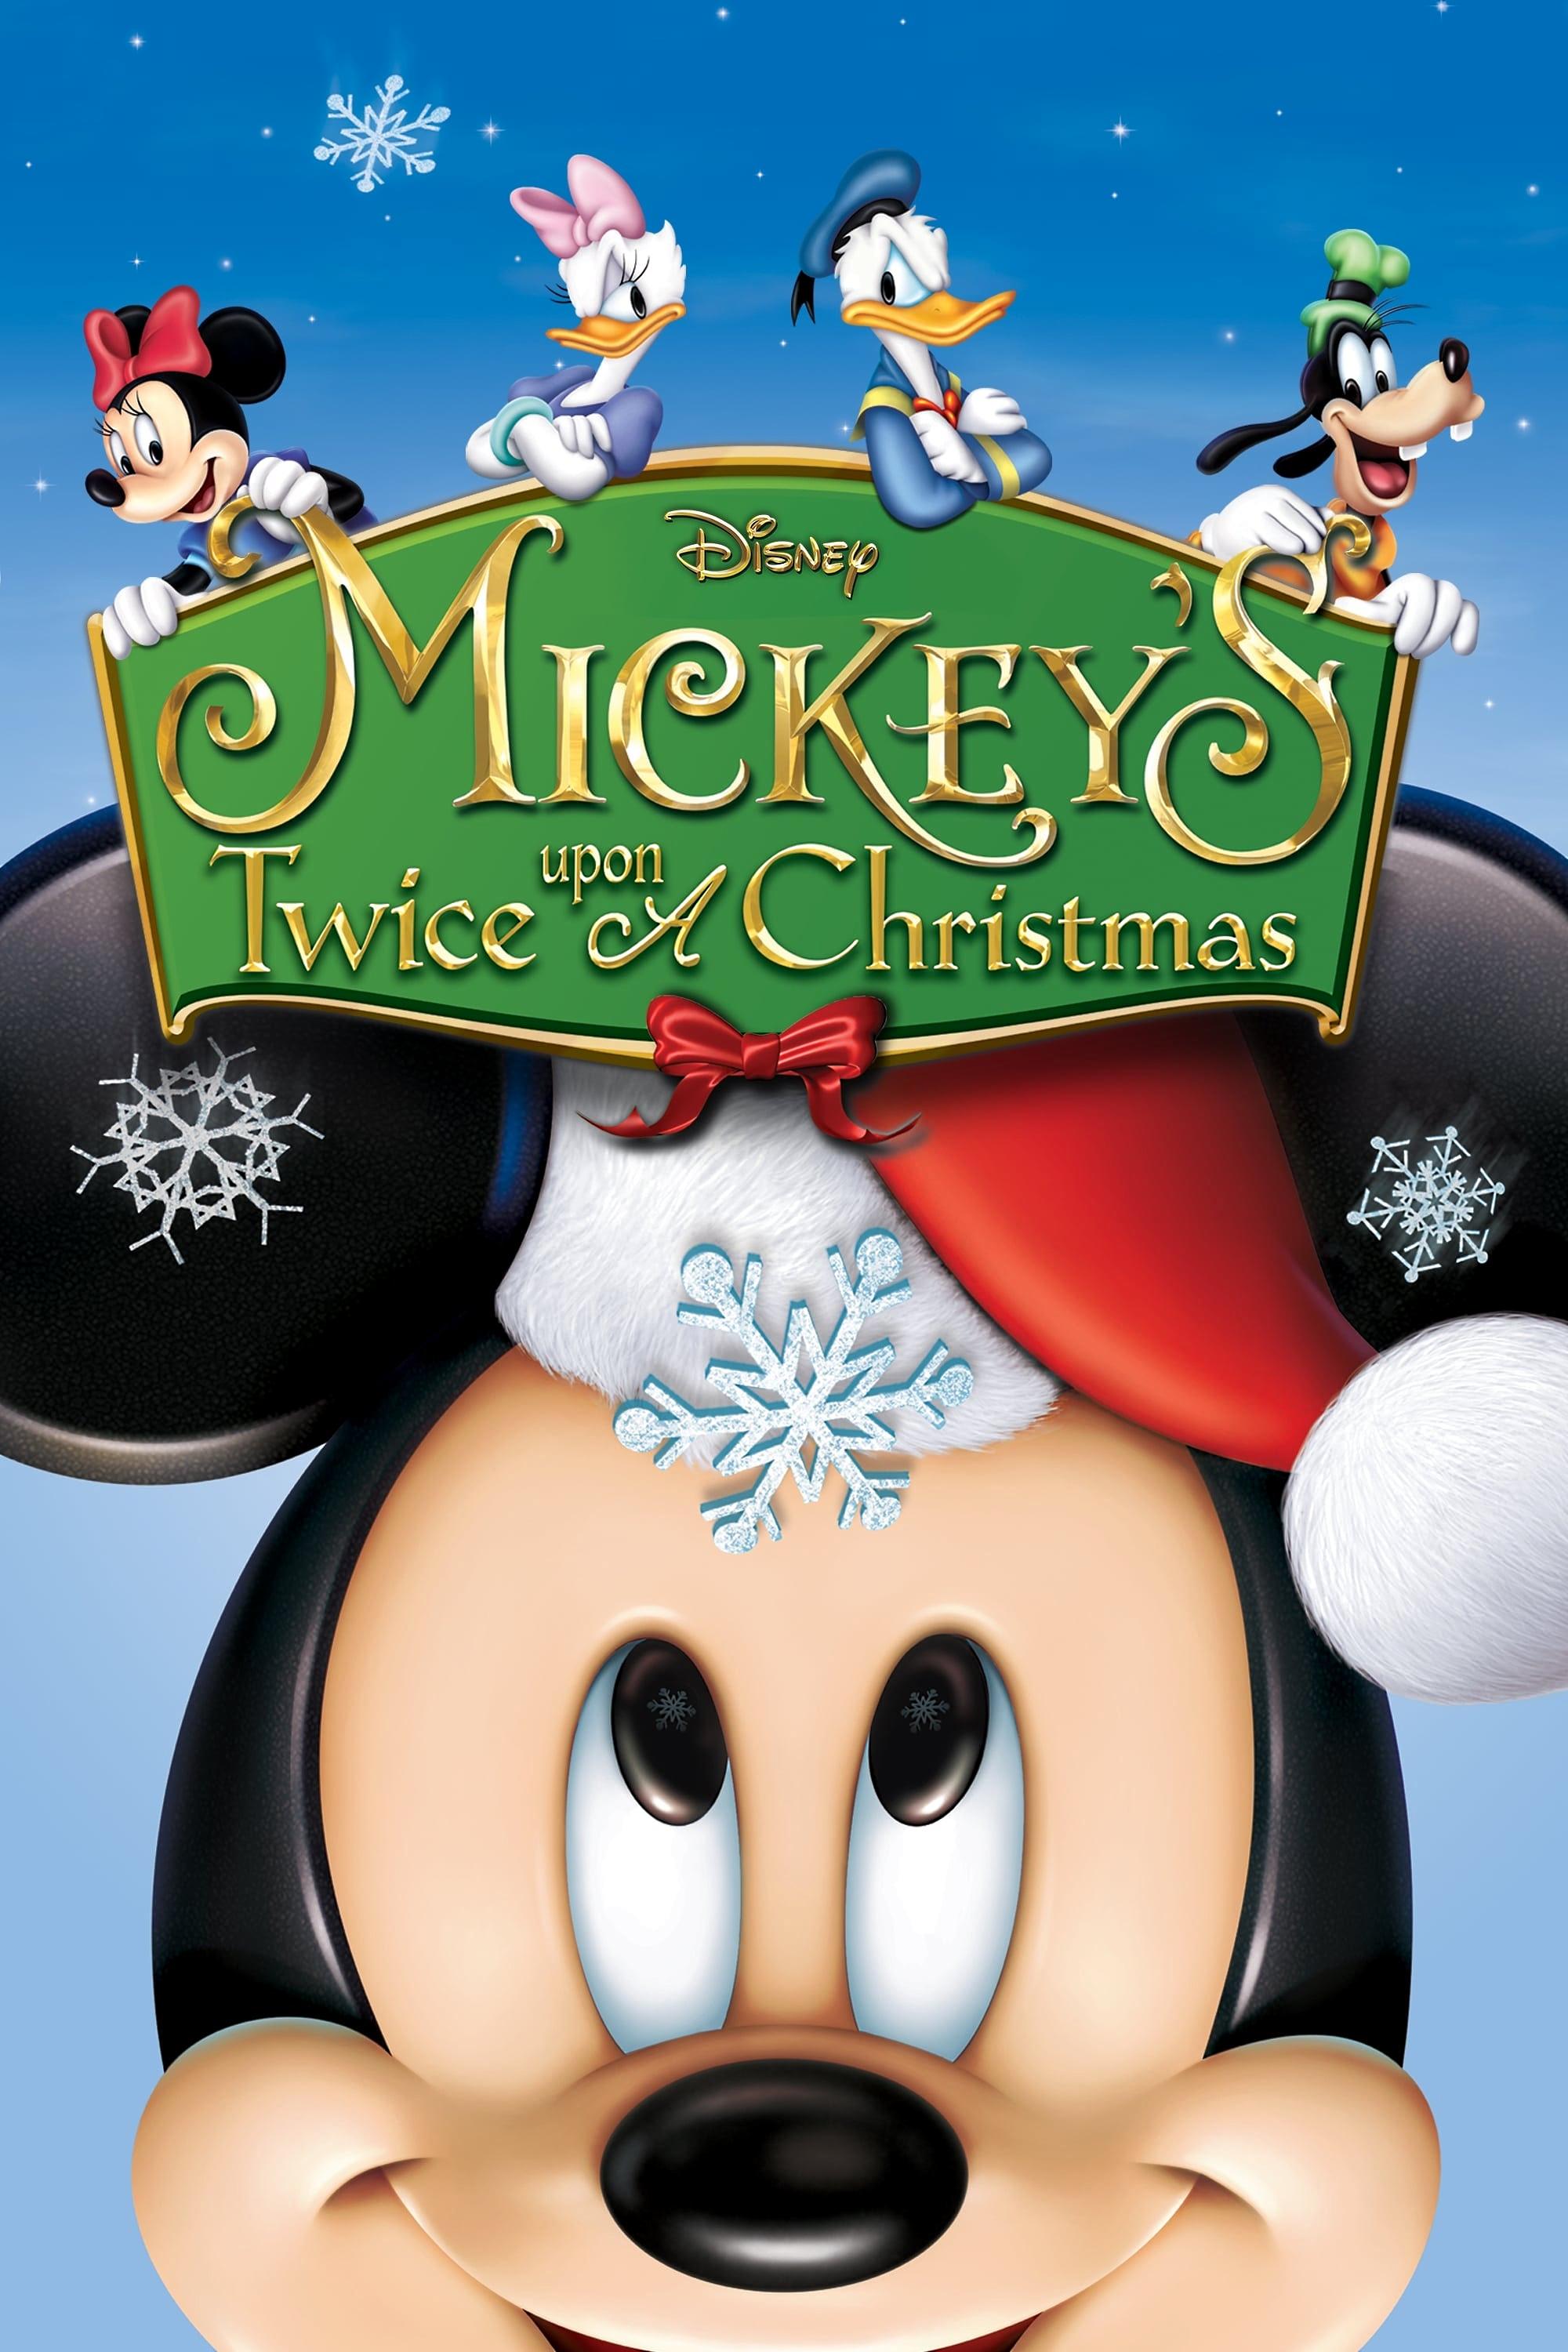  DISNEY MICKEY MOUSE CLUBHOUSE: MICKEY'S GREAT OUTDOORS (HOME  VIDEO RELEASE) : Wayne Allwine, Bret Iwan, Tony Anselmo, Russi Taylor,  Tress MacNeille, Bill Farmer, Rob Paulsen: Movies & TV